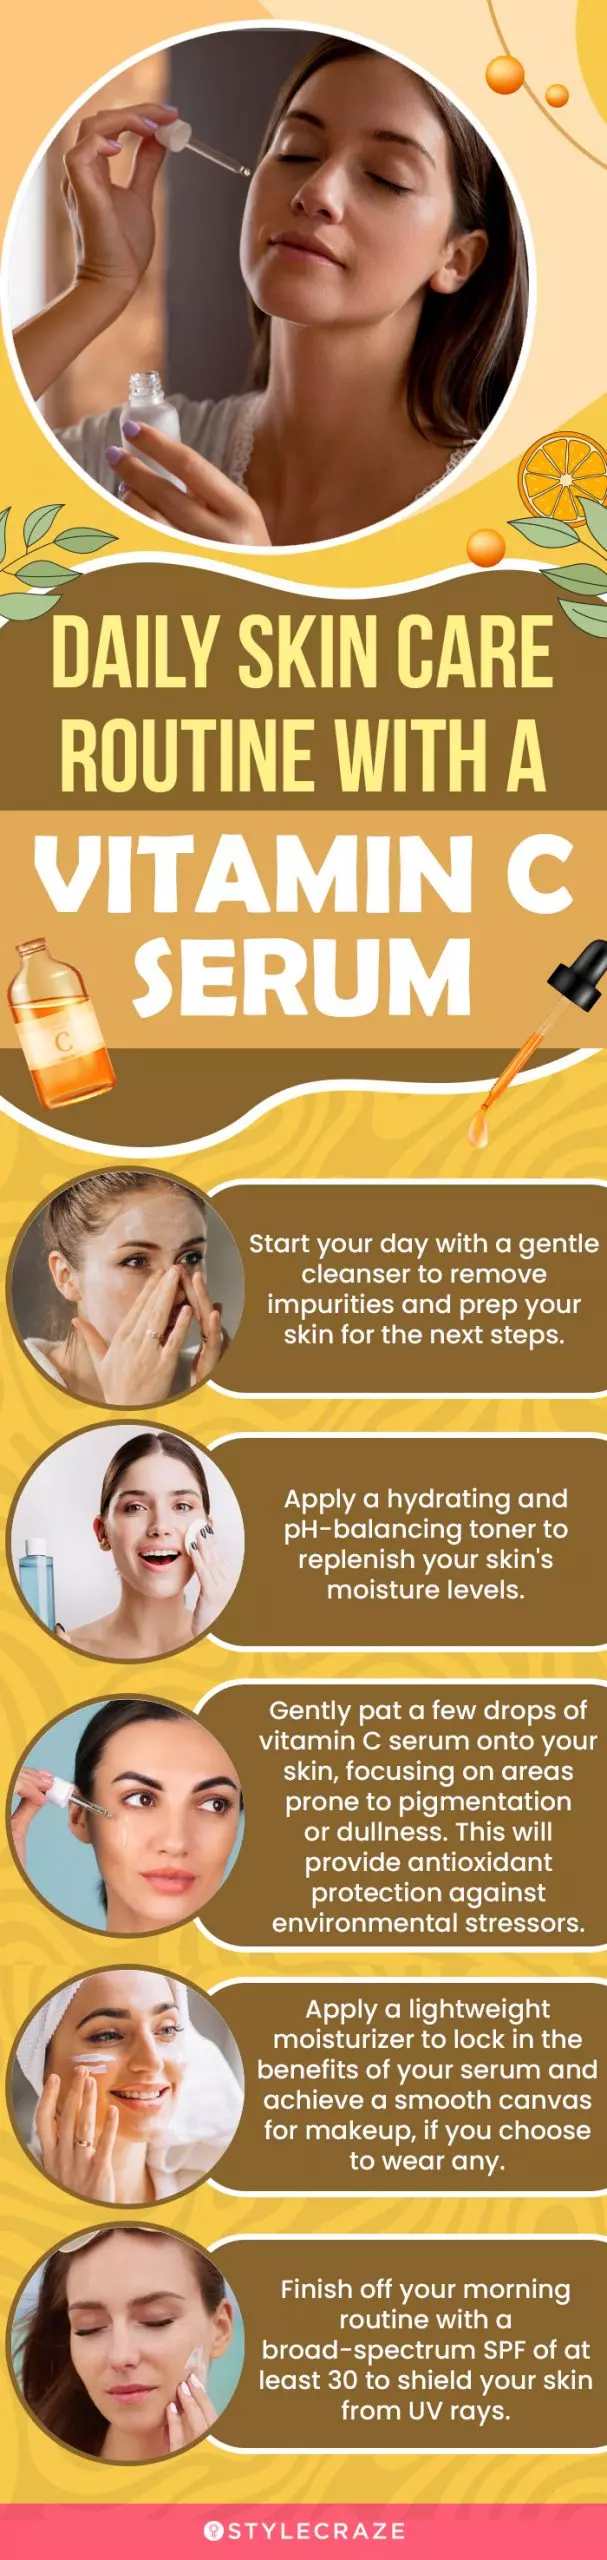 Daily Skin Care Routine With Vitamin C Serums (infographic)